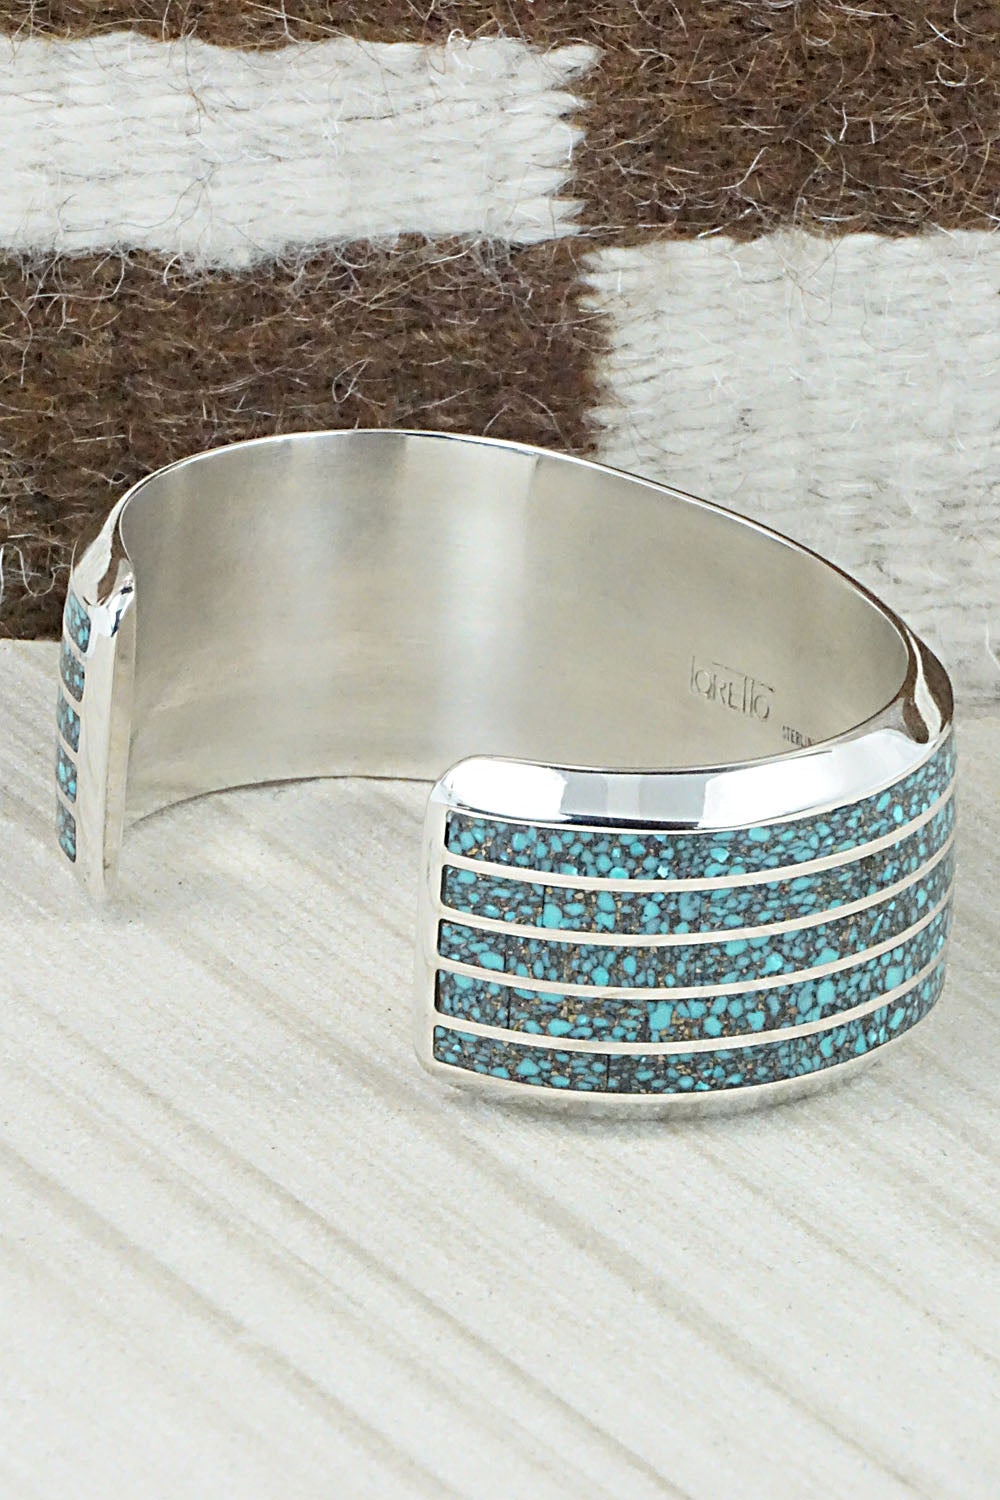 Turquoise & Sterling Silver Inlay Bracelet - Larry Loretto